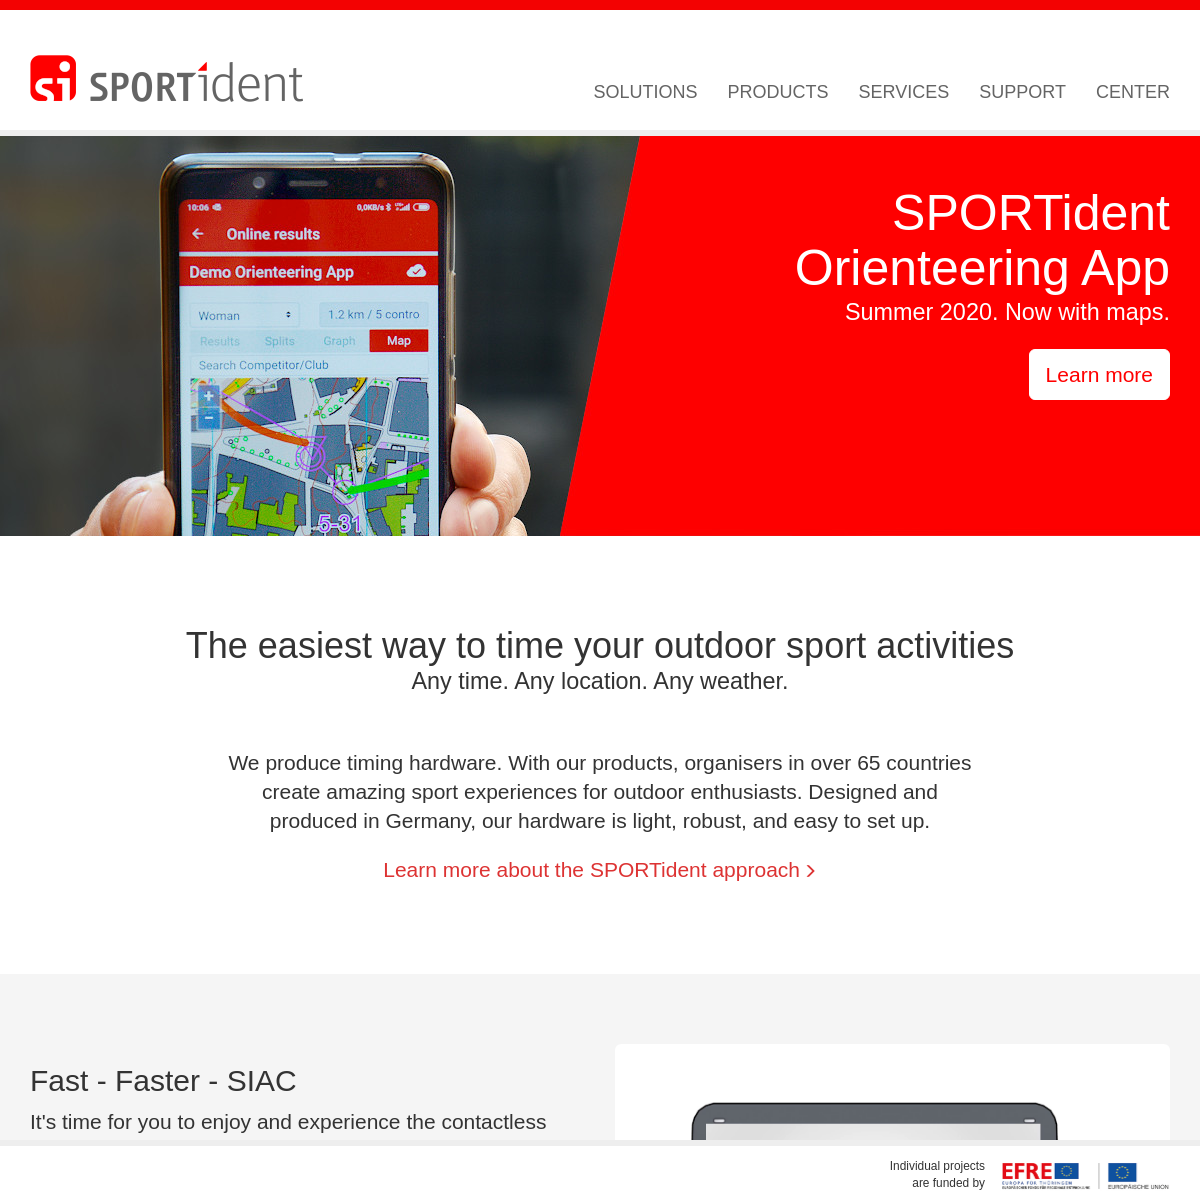 A complete backup of sportident.com